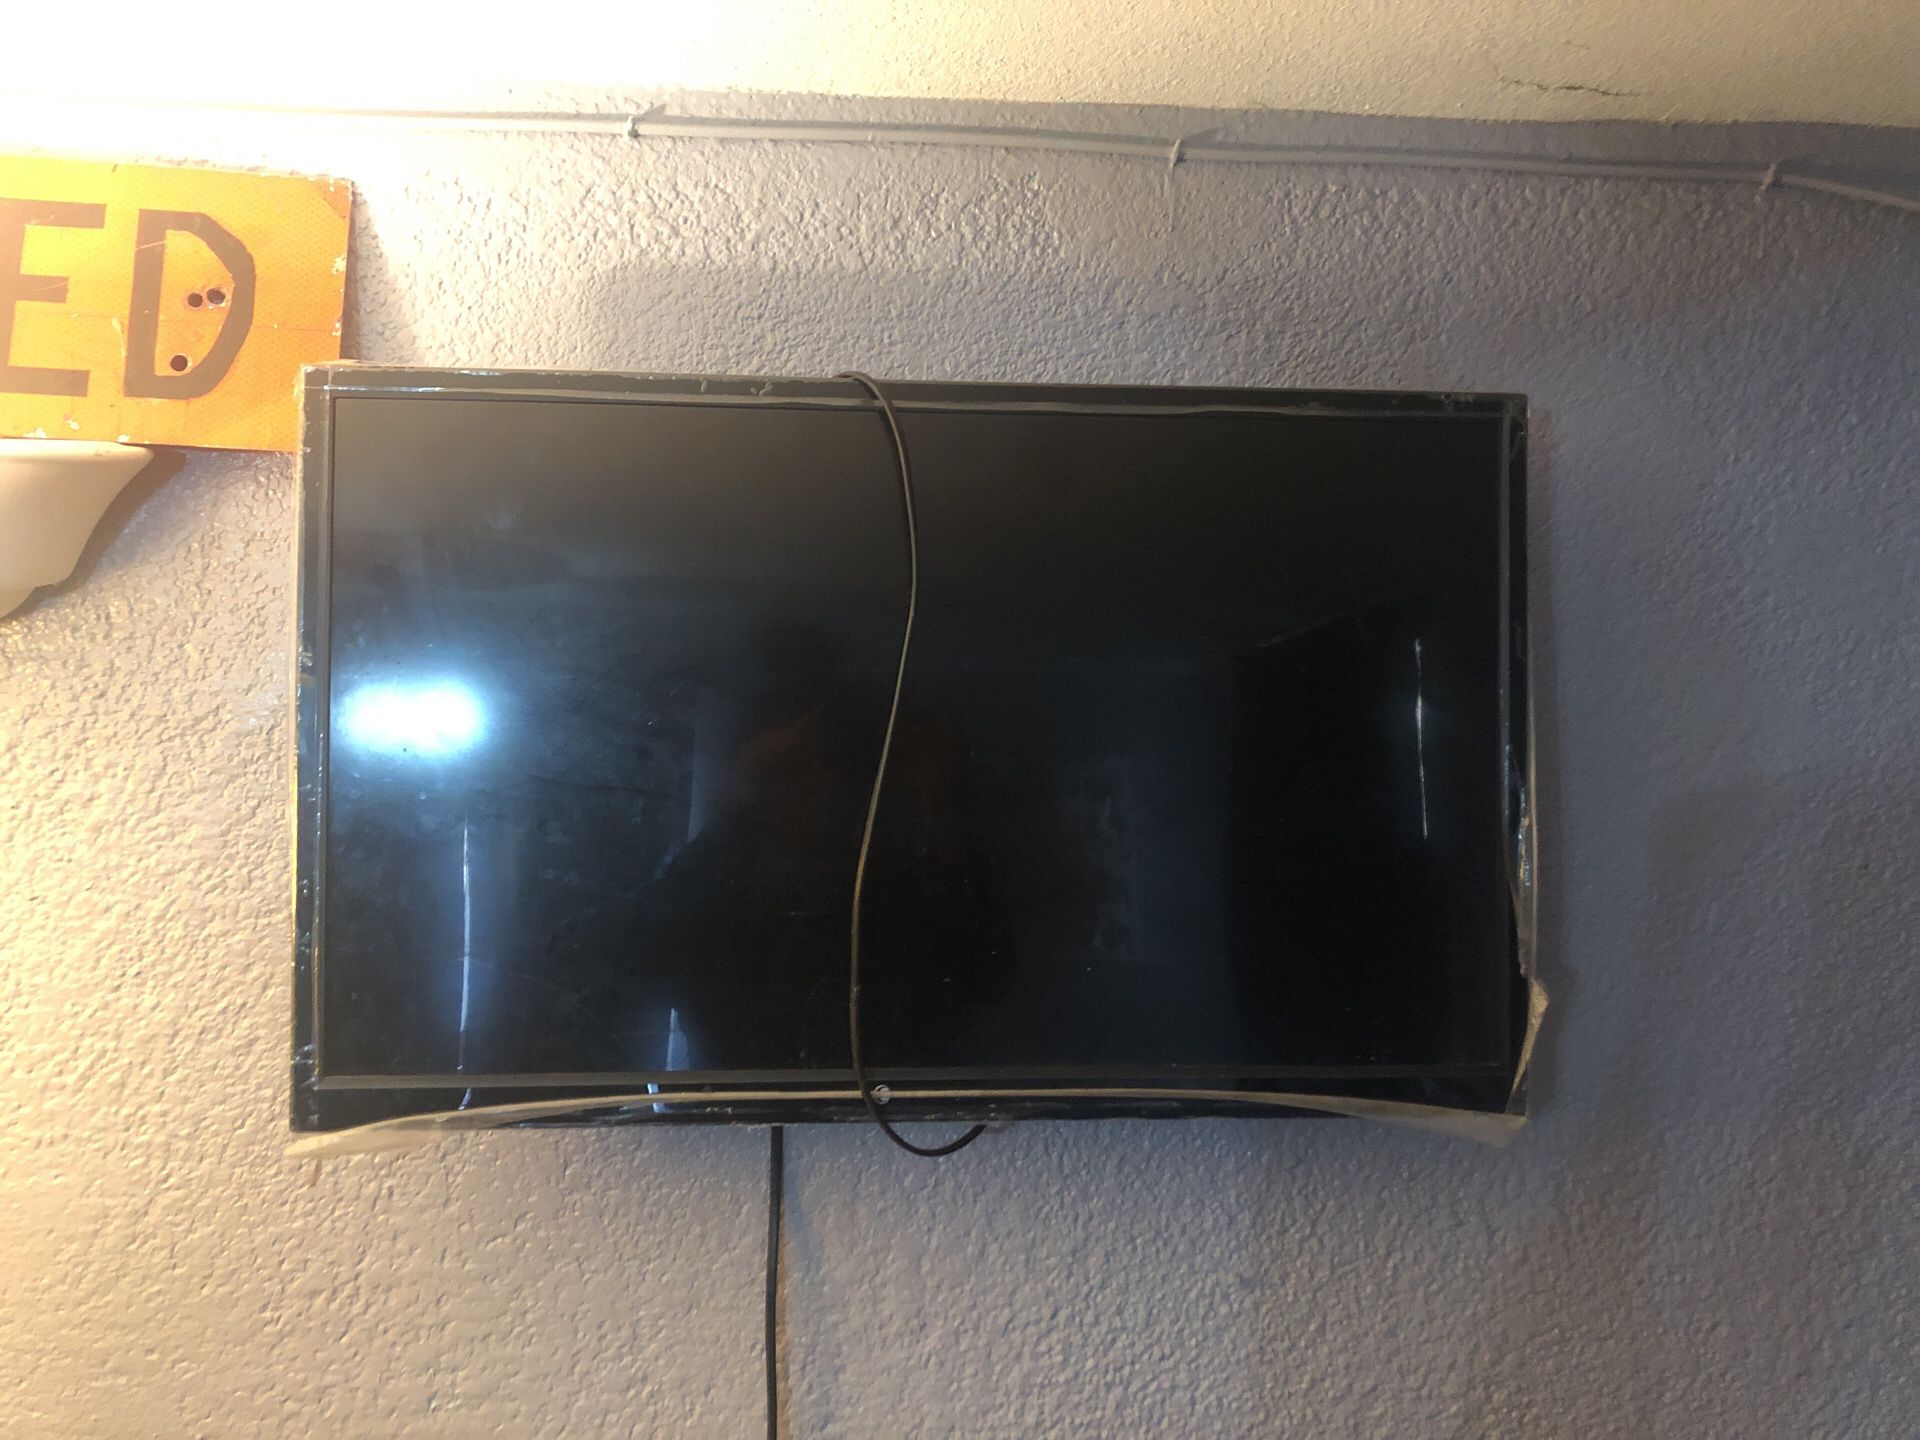 32” ELEMENT TV WITH CONTROL WORKS GREAT STILL HAS PLASTIC AROUND